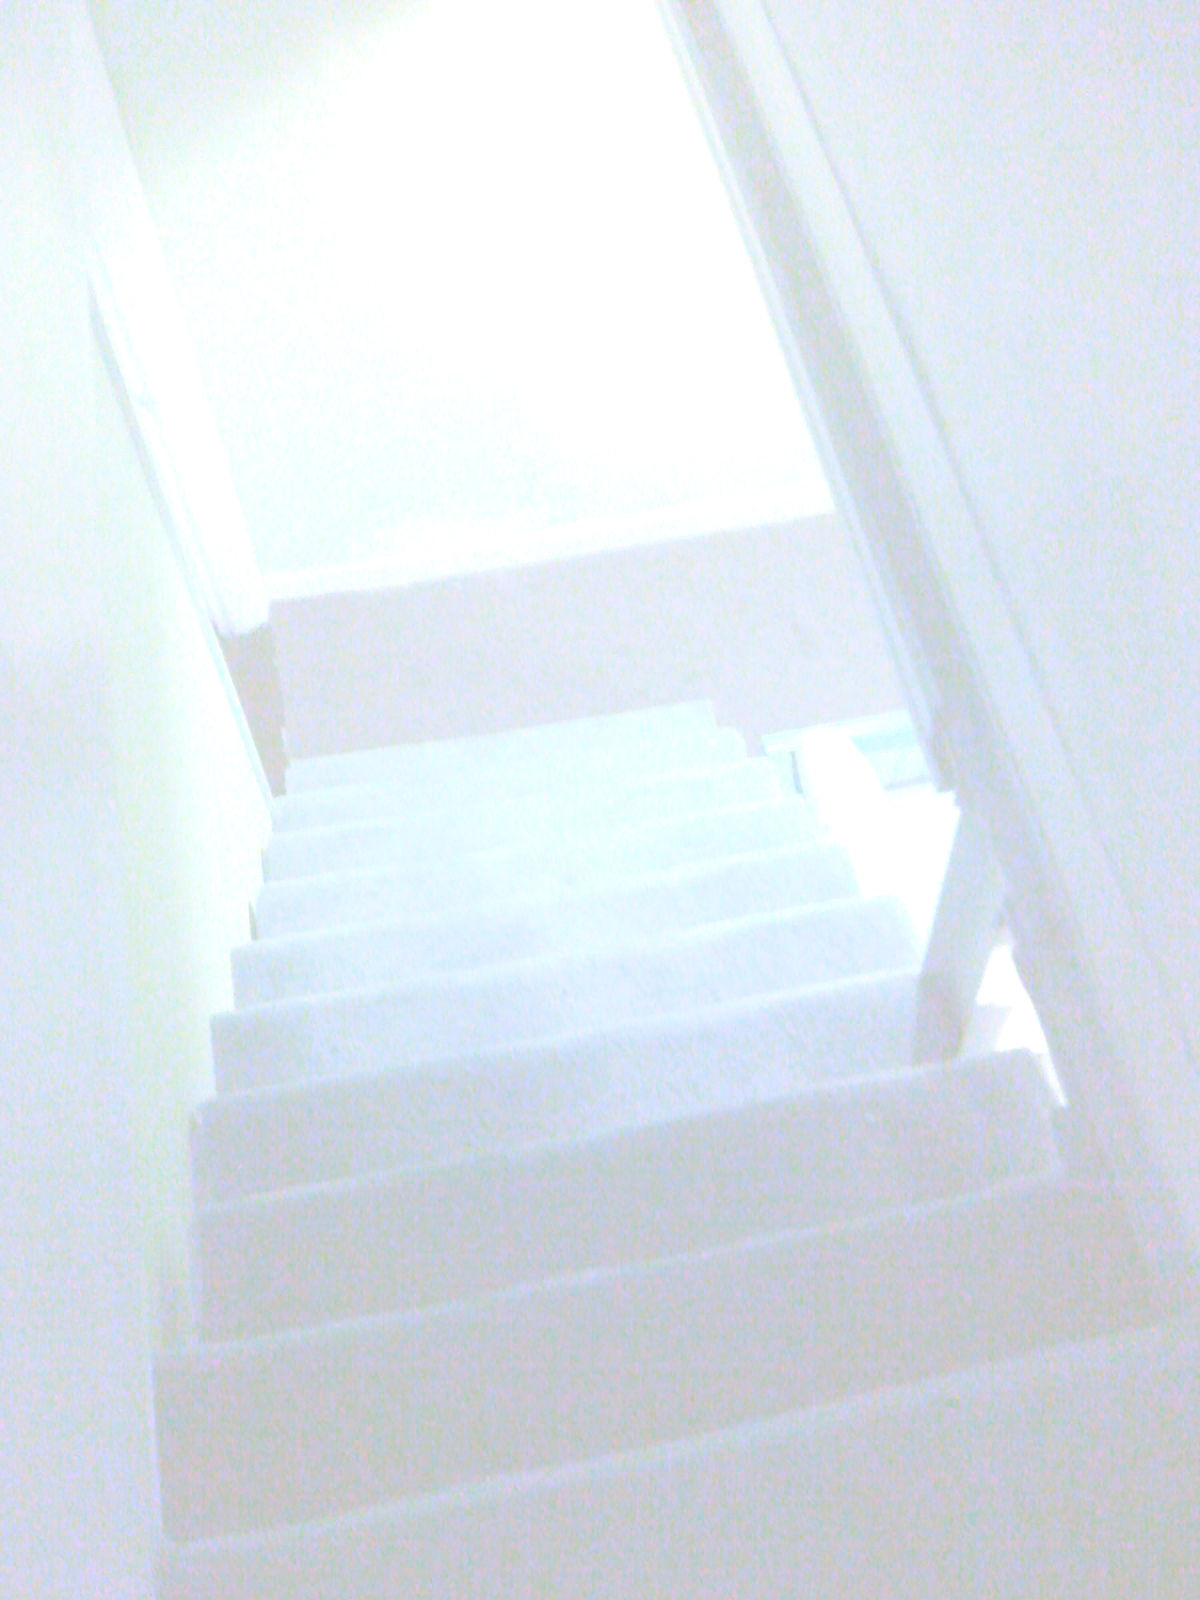 Scenes From My New House:  Stairs to the Basement